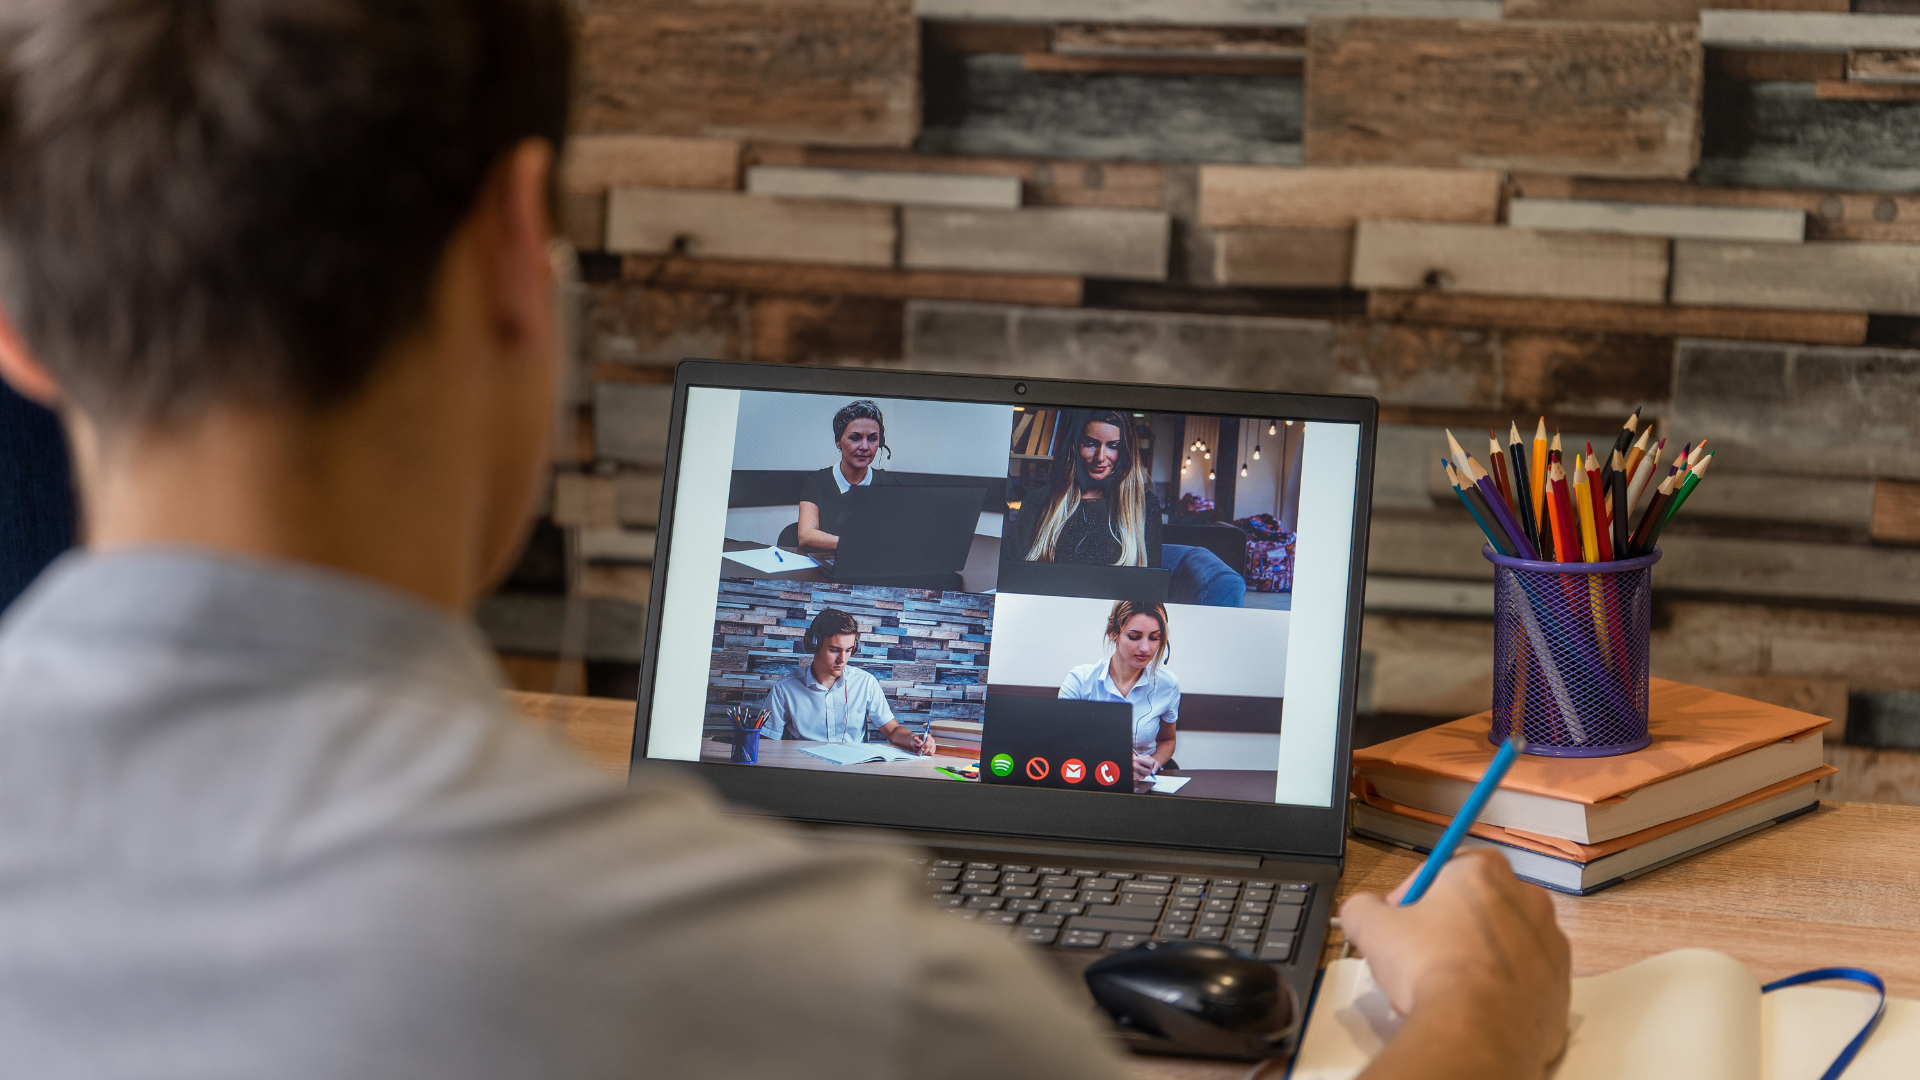 Expert Advice for Hiring Remote Workers: 5 Tips to Build a Team